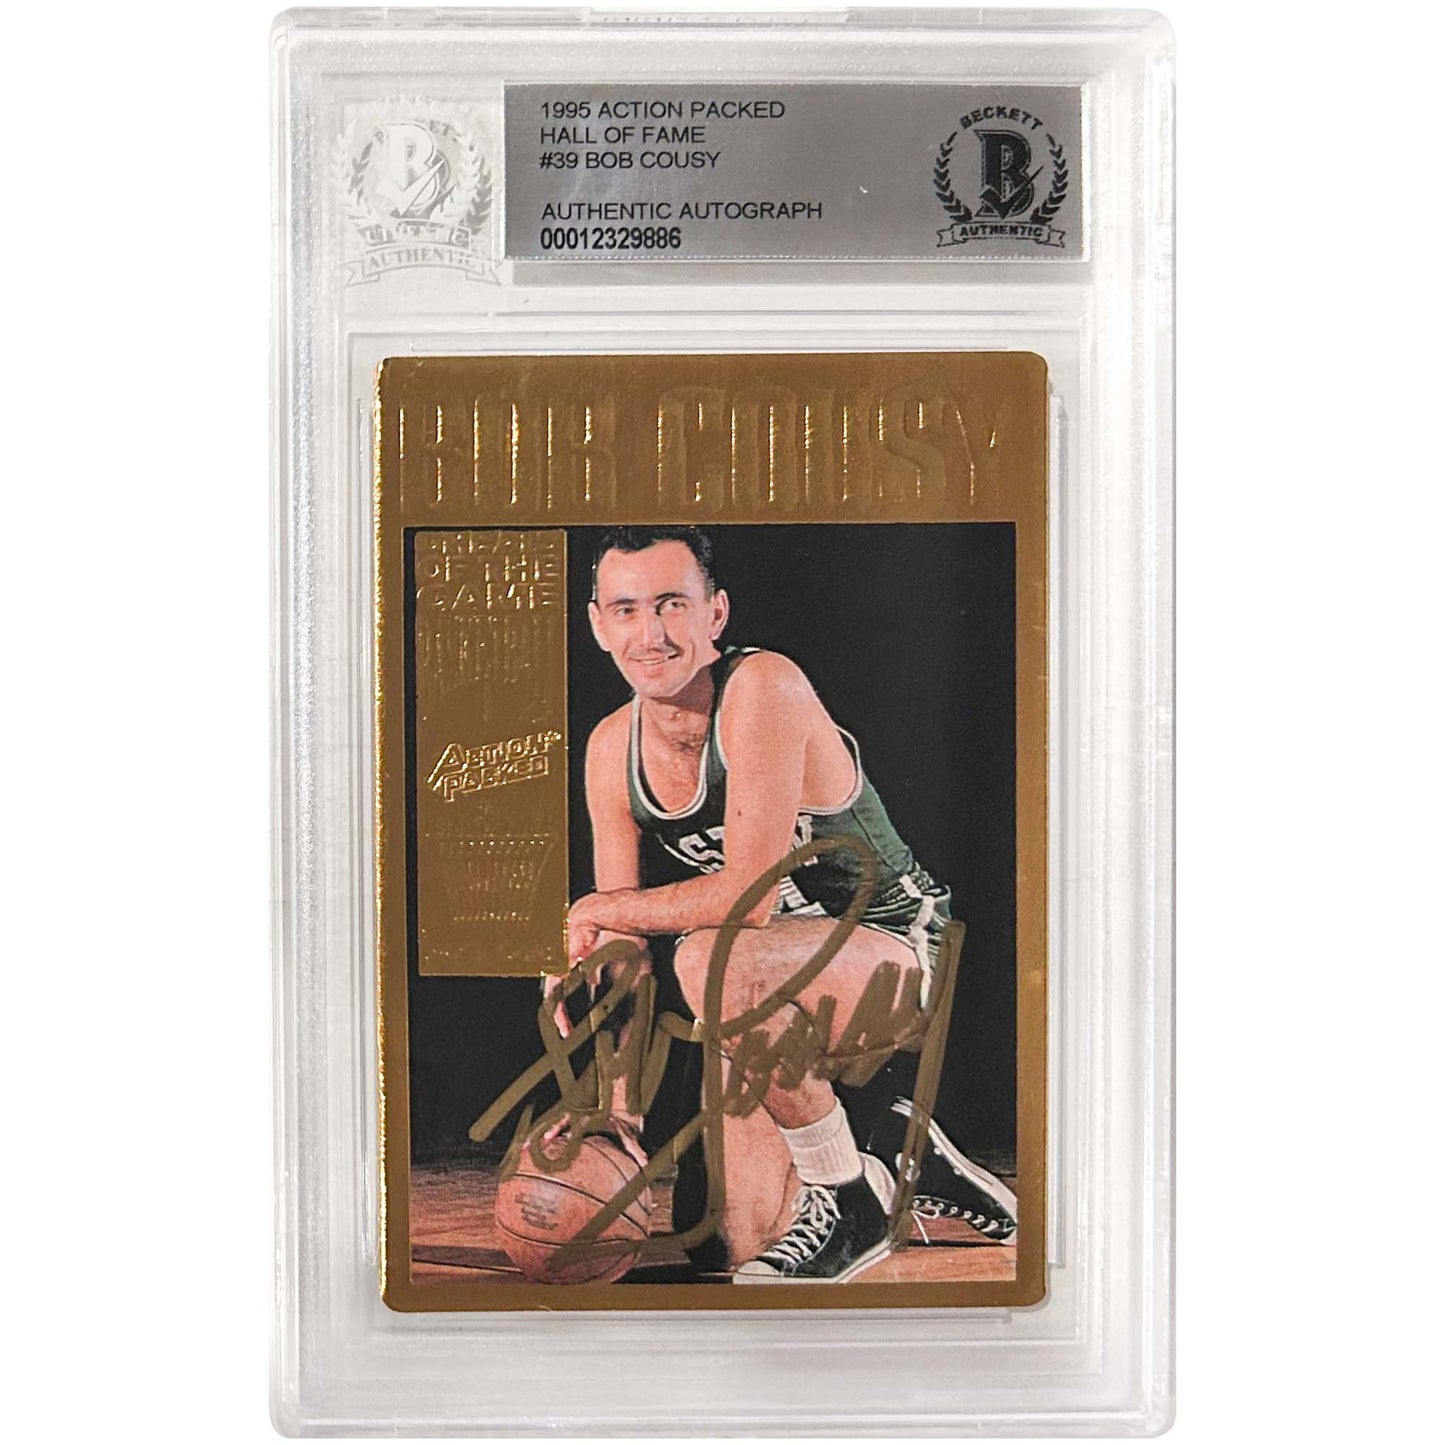 Beckett Authentic - #39 Bob Cousy Action Packed Hall of Fame Card Zoomed View